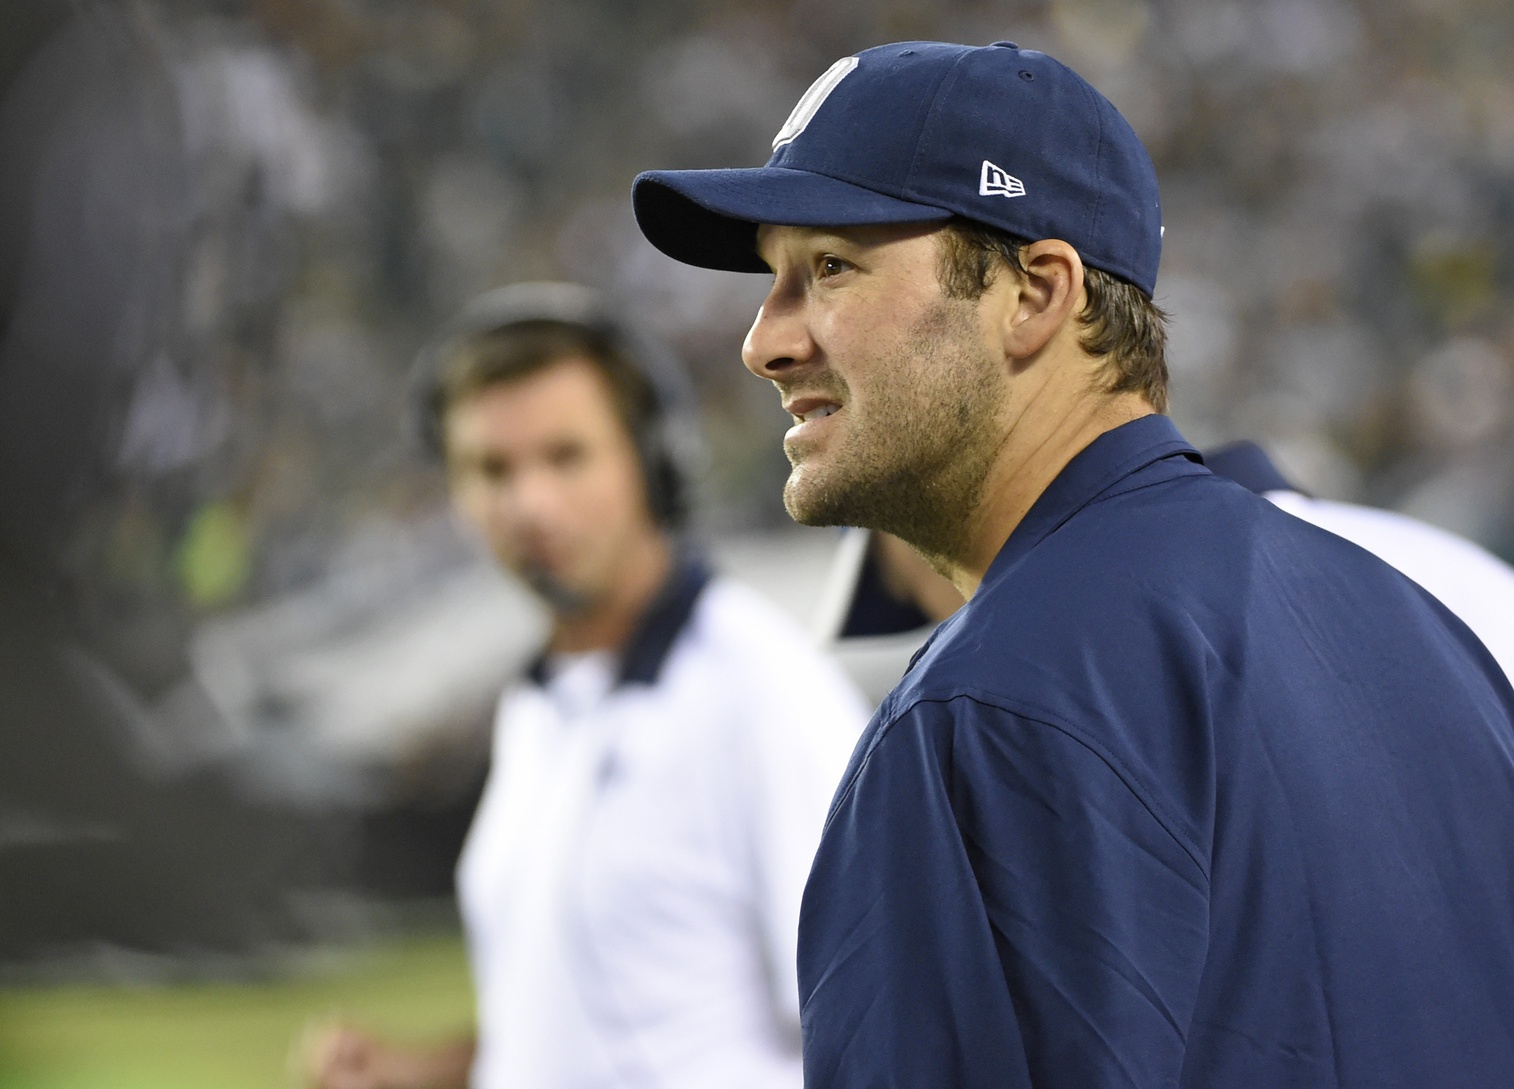 Will Tony Romo be traded or released?